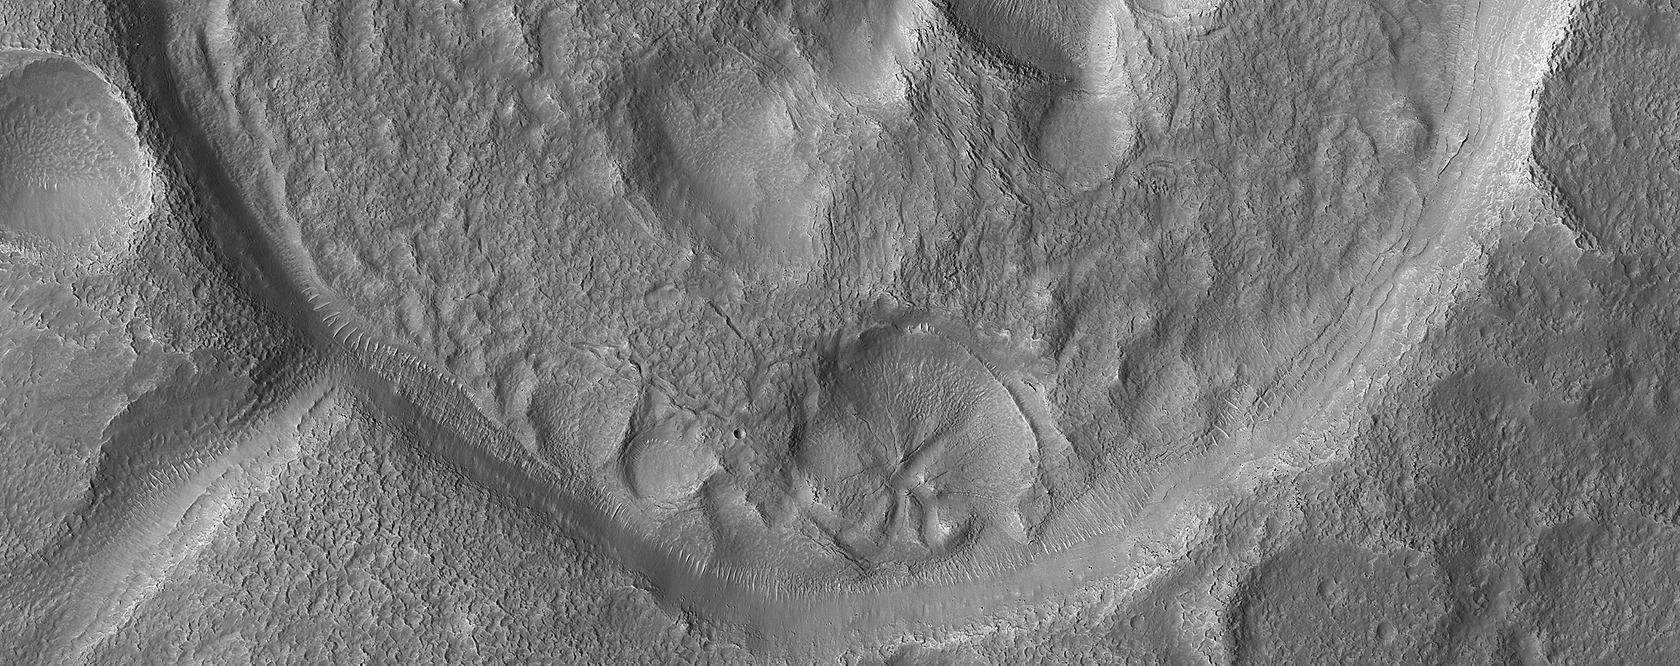 Pollywog Craters on Mars